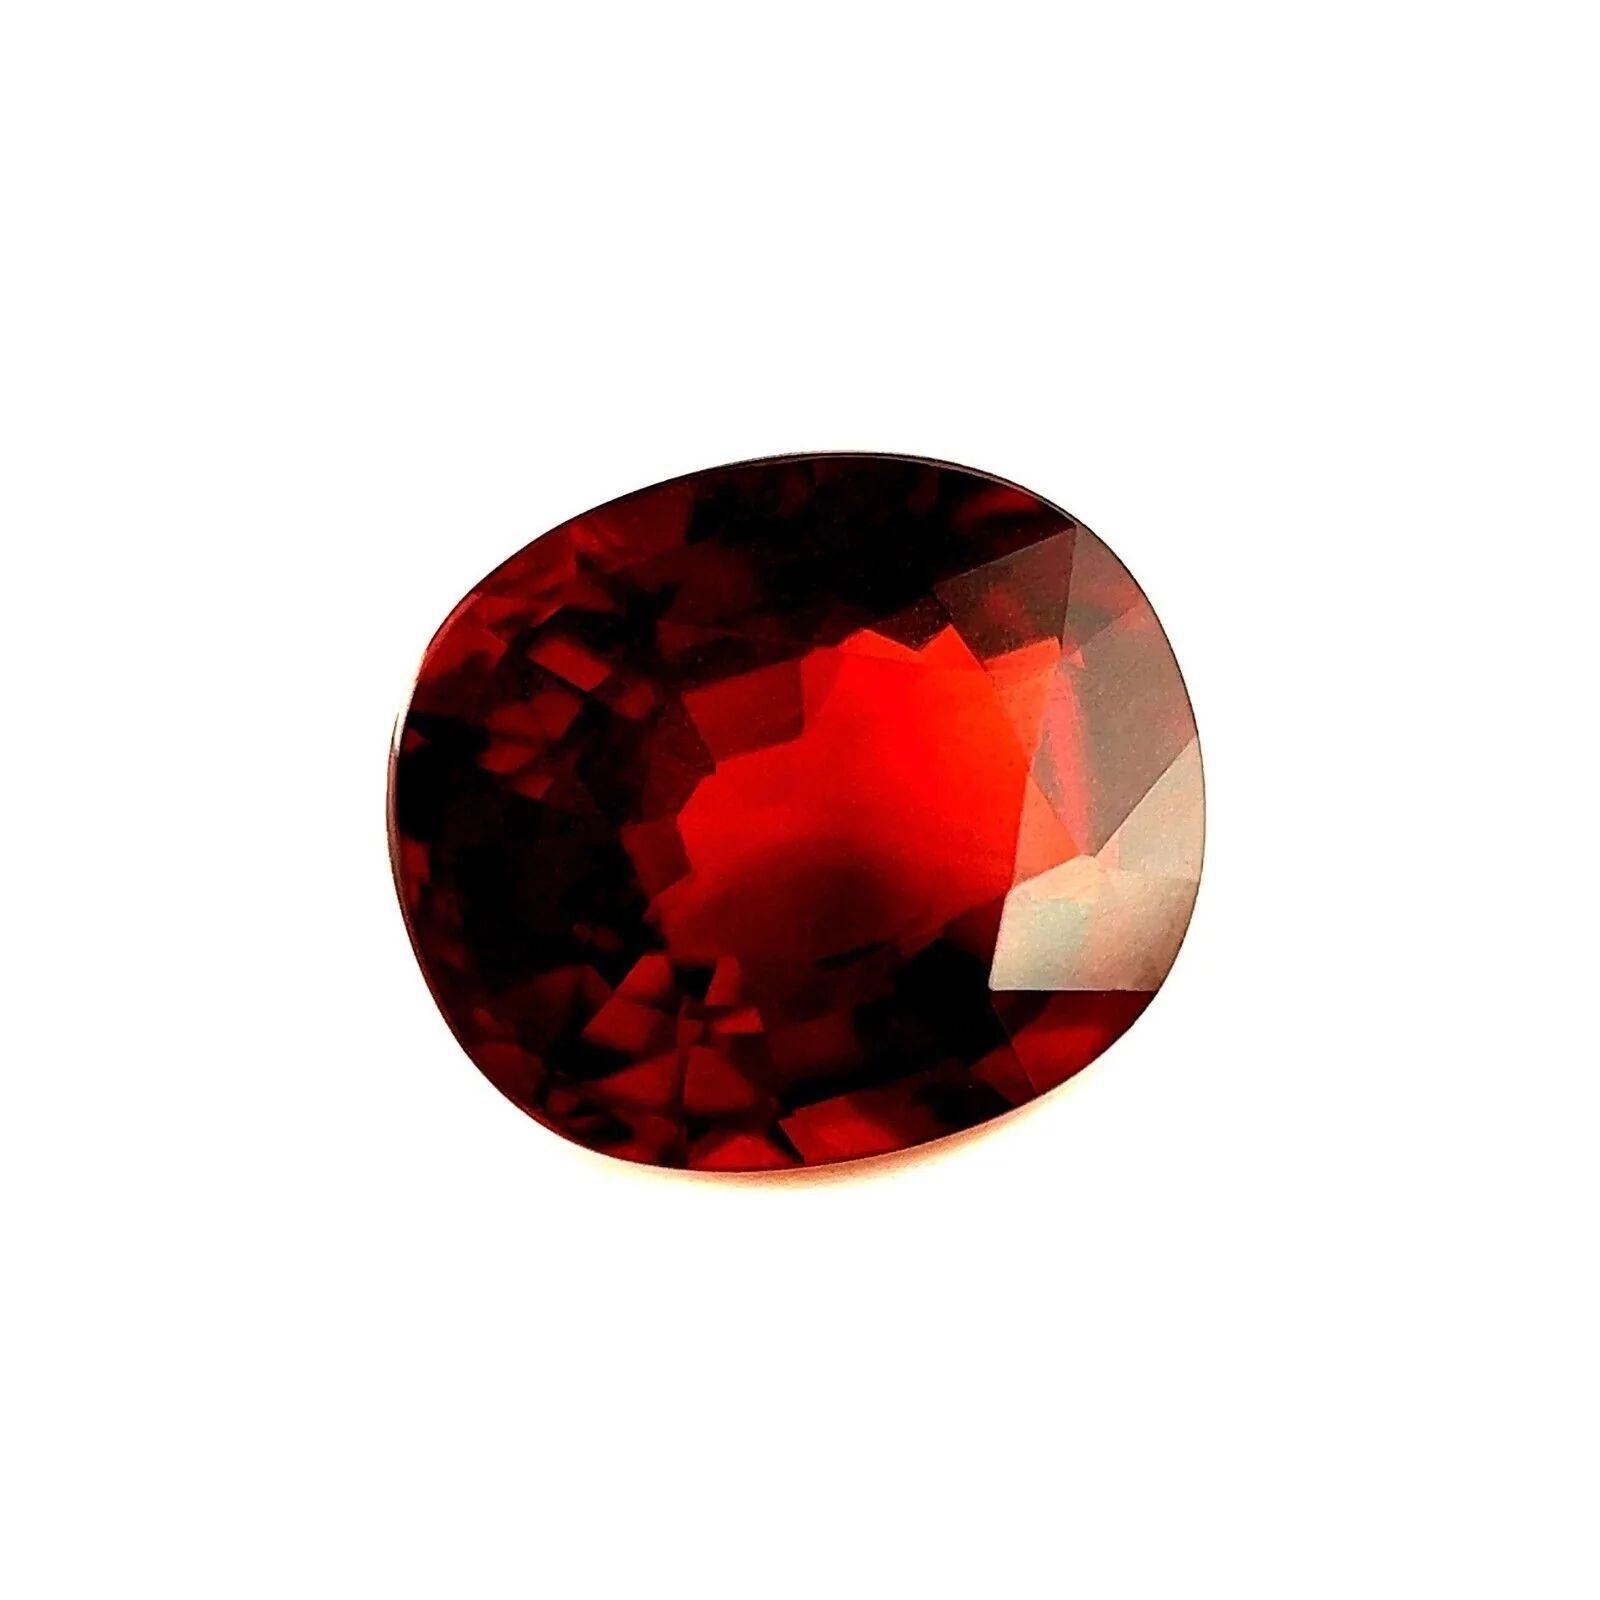 3.28ct Vivid Orange Spessartine Garnet Cushion Cut Loose Gem 9.5x8mm VS

Fine Natural Spessartine Garnet Loose Gemstone.
3.28 Carat with a beautiful vivid reddish orange colour and very good clarity. Clean stone with only small natural inclusions